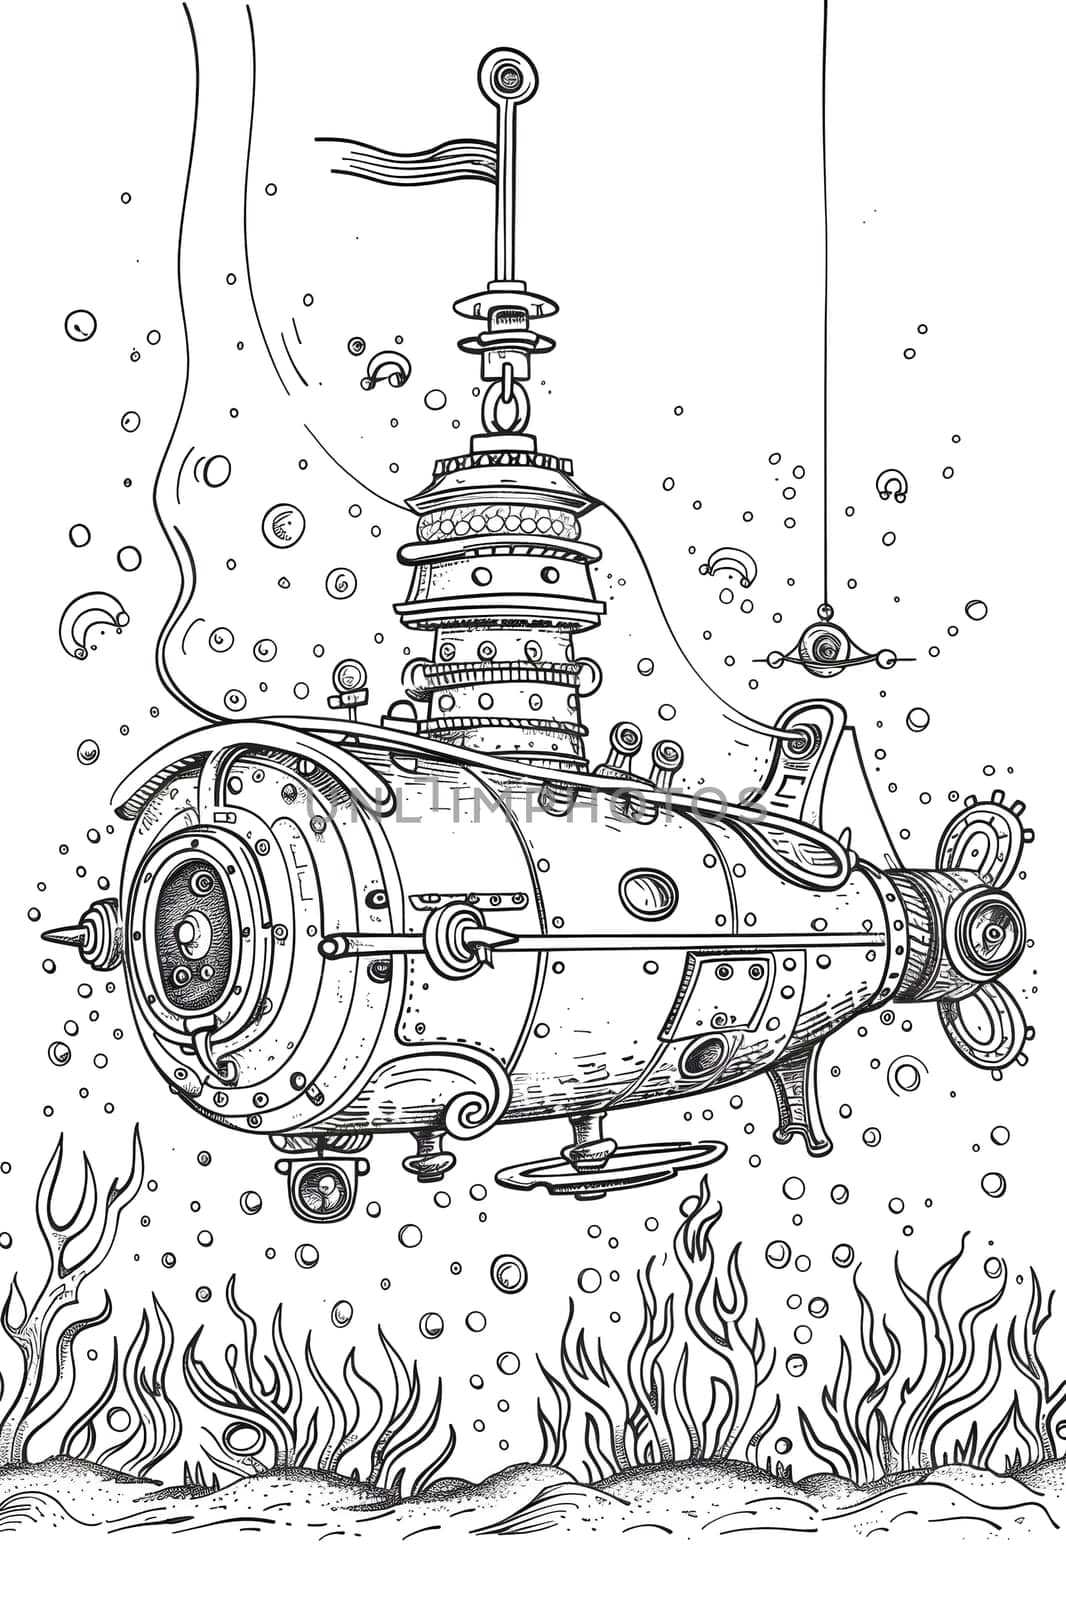 A monochrome drawing of a submarine in the ocean, perfect for a coloring book by Nadtochiy